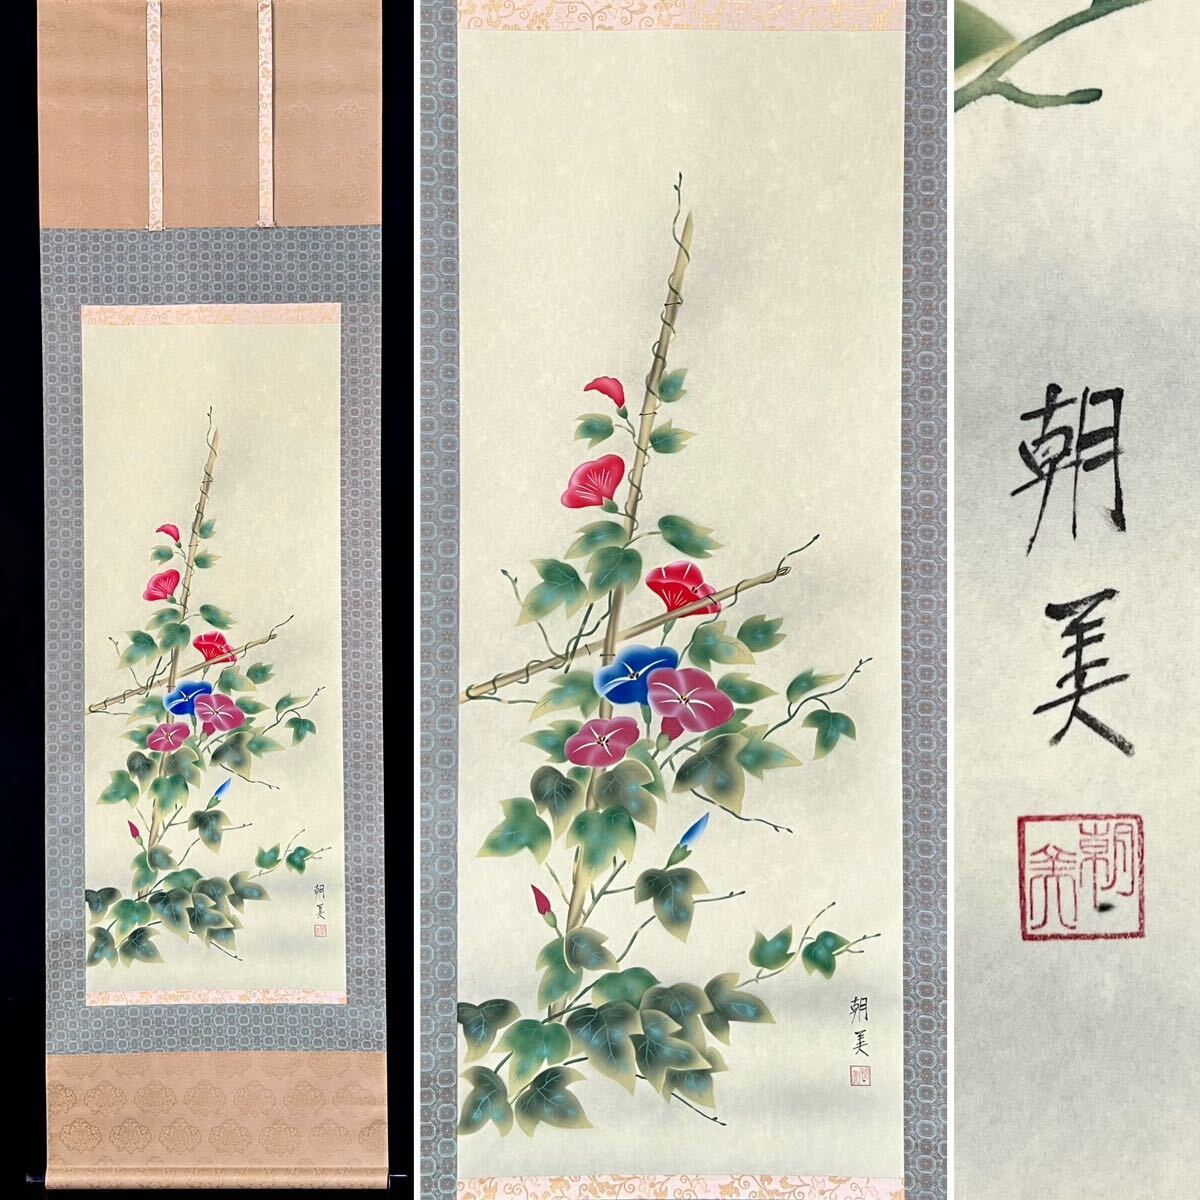 [Reproduction] Asami Morning Glory hanging scroll, silk, flower picture, Japanese painting, Japanese art, morning glory, hand-painted by a human, k032213, Painting, Japanese painting, Flowers and Birds, Wildlife